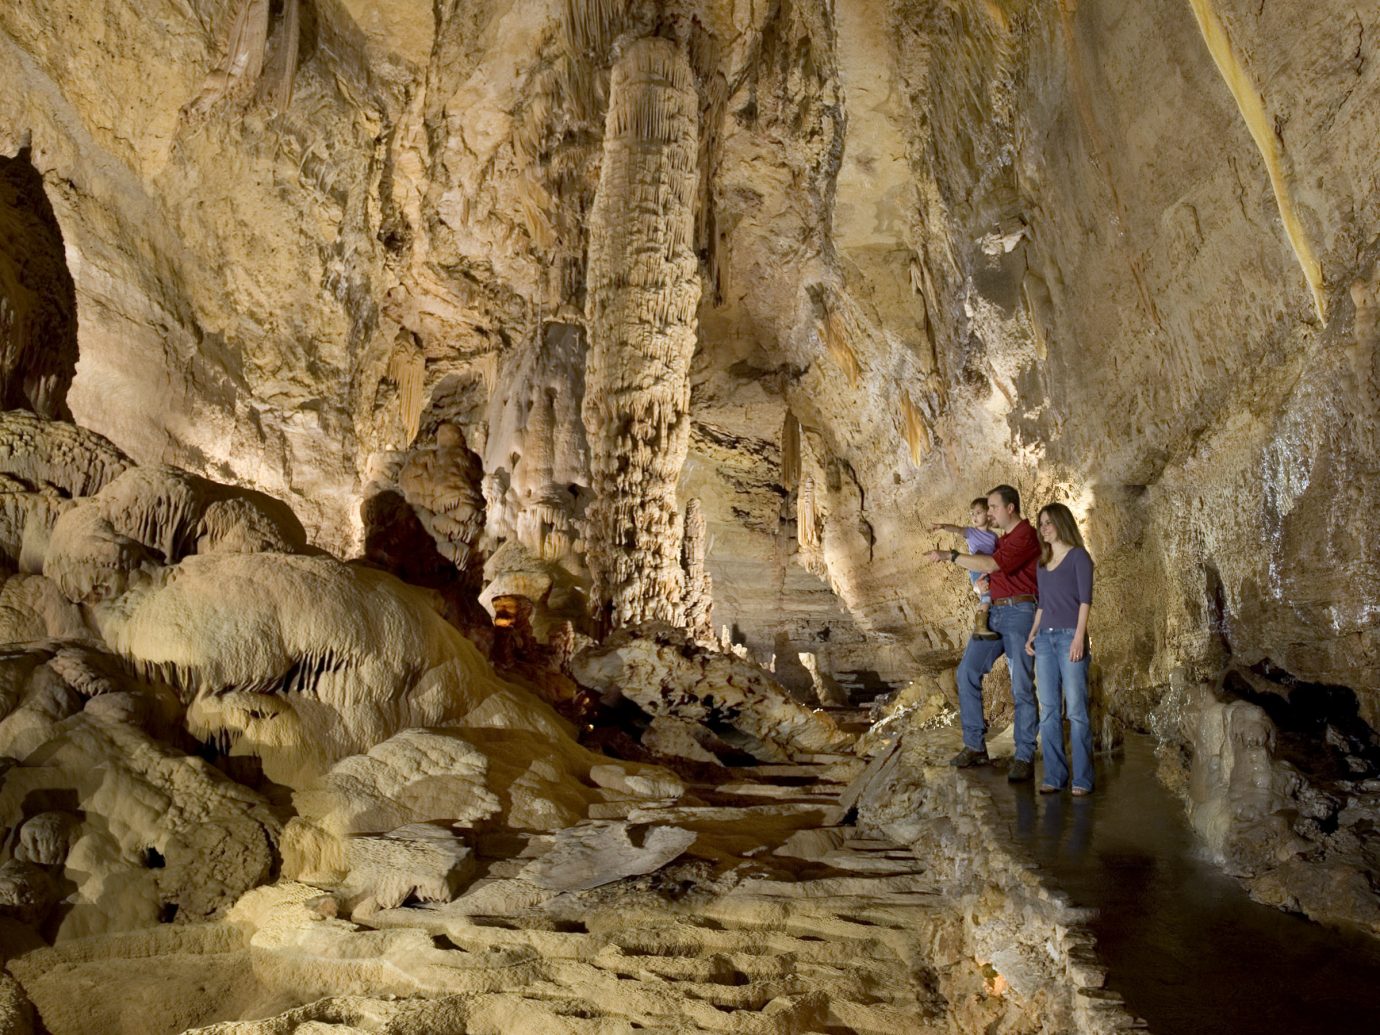 Family Travel Trip Ideas Weekend Getaways outdoor rock Nature geographical feature landform cave mountain caving pit cave wadi rocky geology stalagmite formation speleothem stone